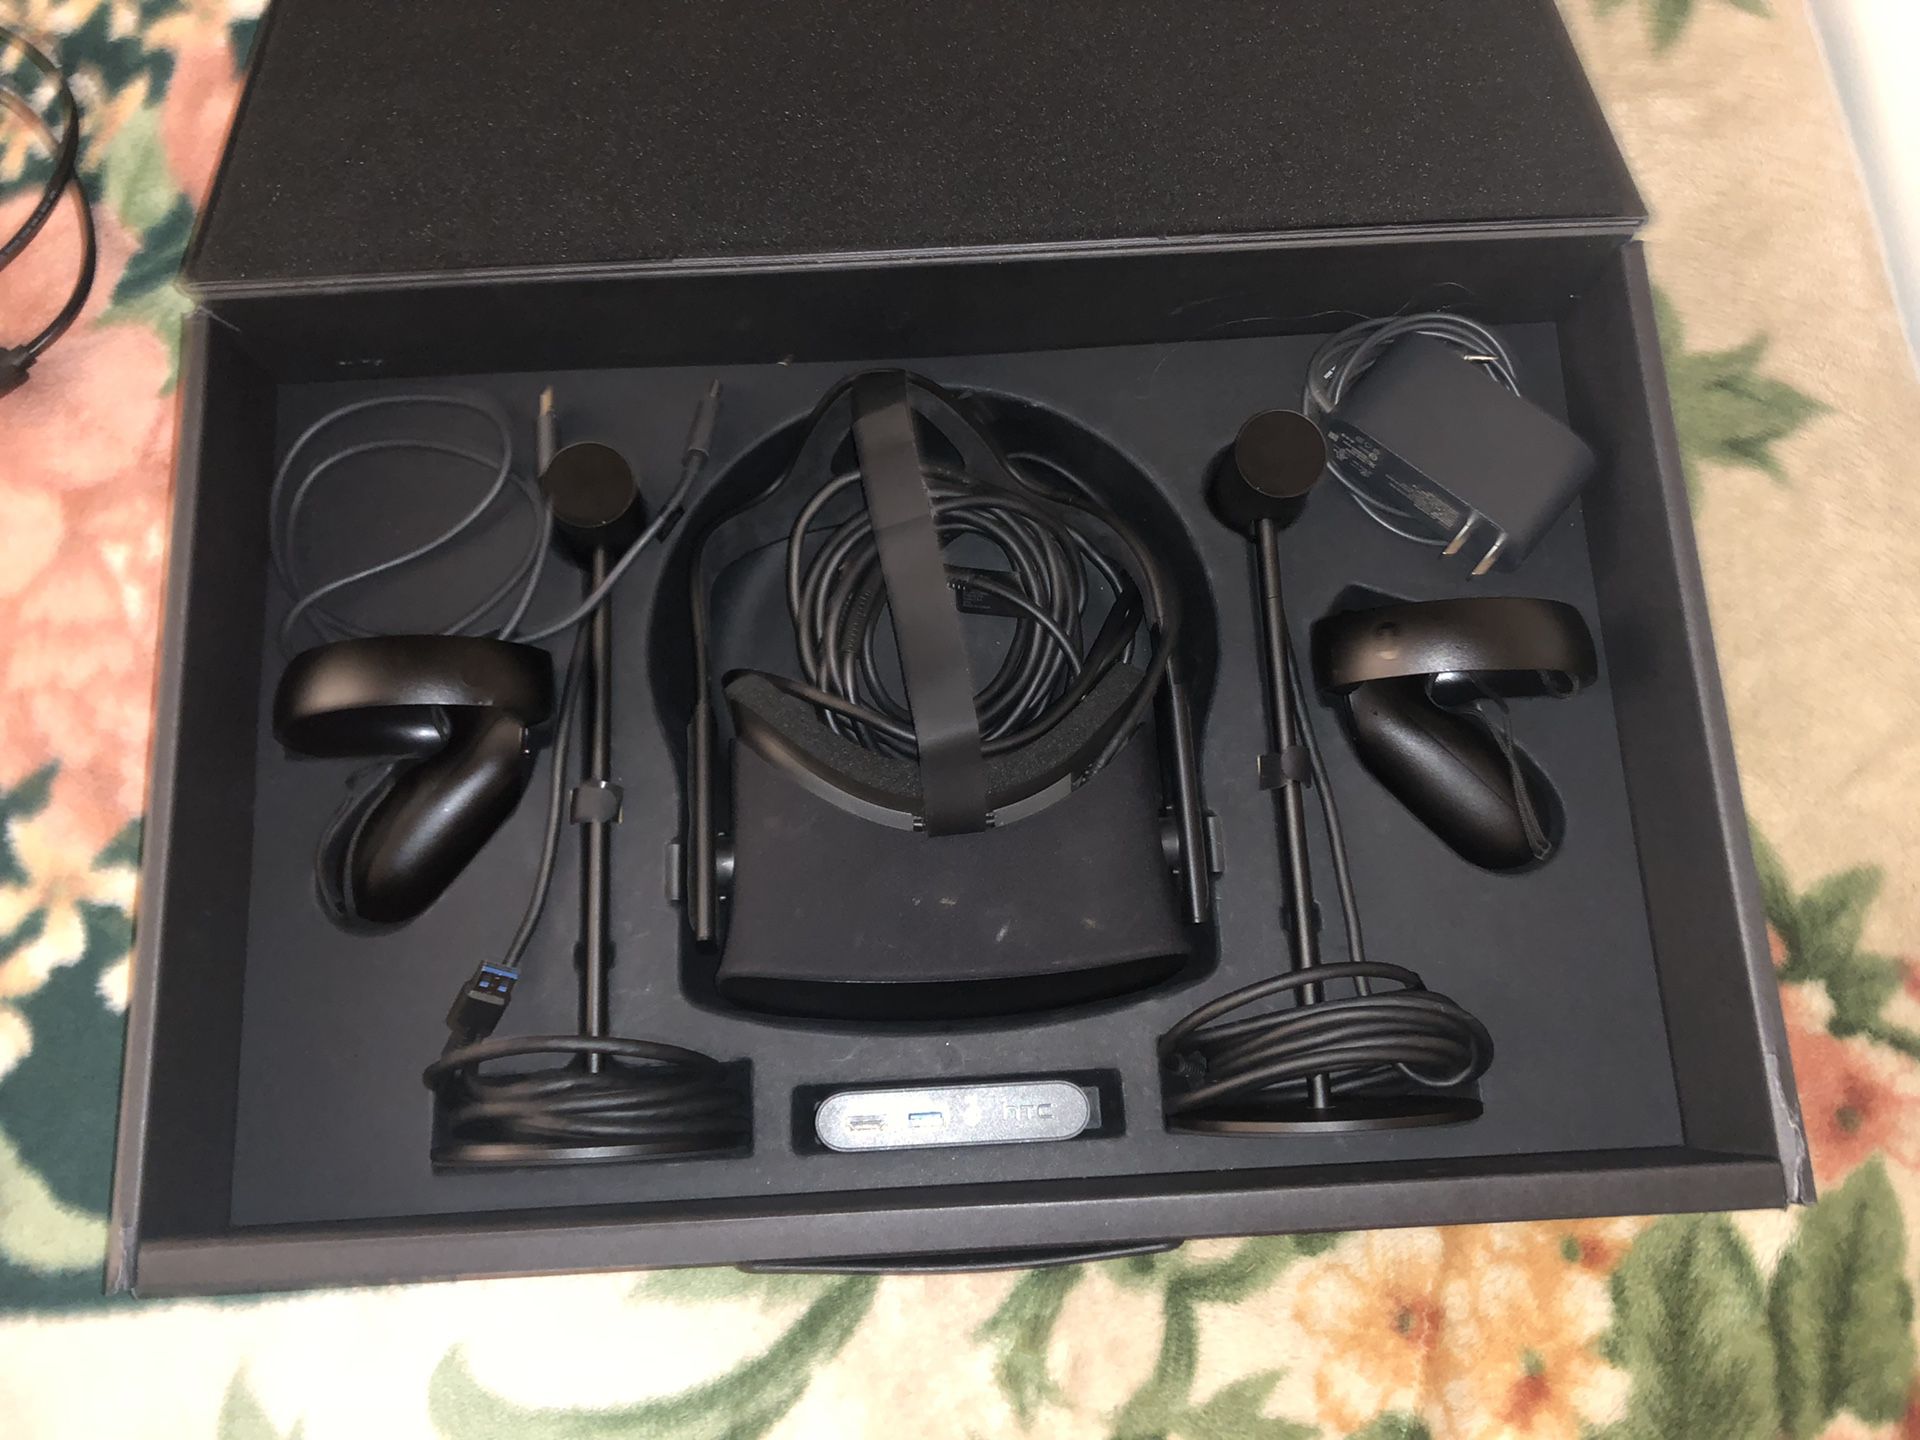 Oculus rift headset comes with extension cables and wall mounts